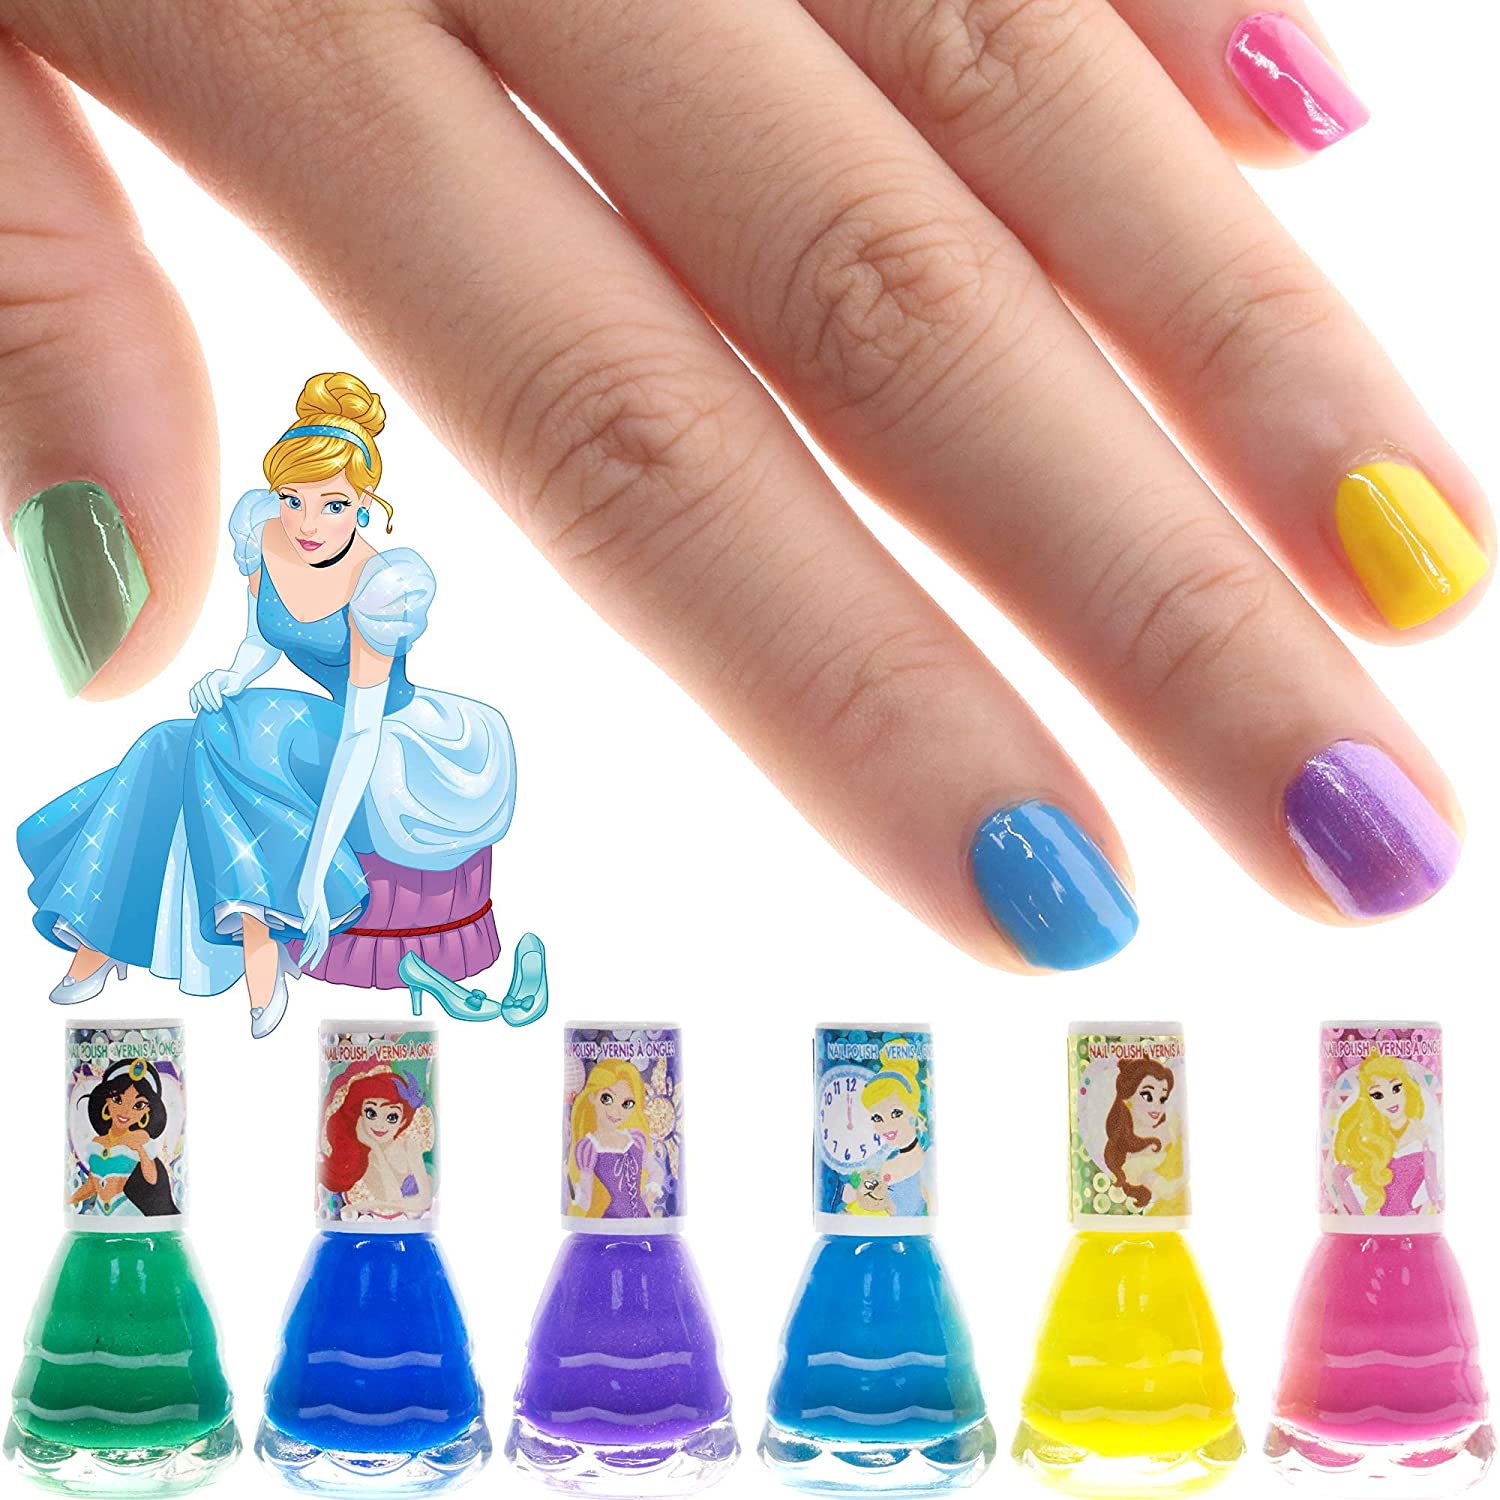 Disney Princess - Townley Girl Castlebox Non-Toxic Peel-Off Nail Polish Set for Girls, Opaque Colors, Ages 3+ - 18 CT - image 4 of 10